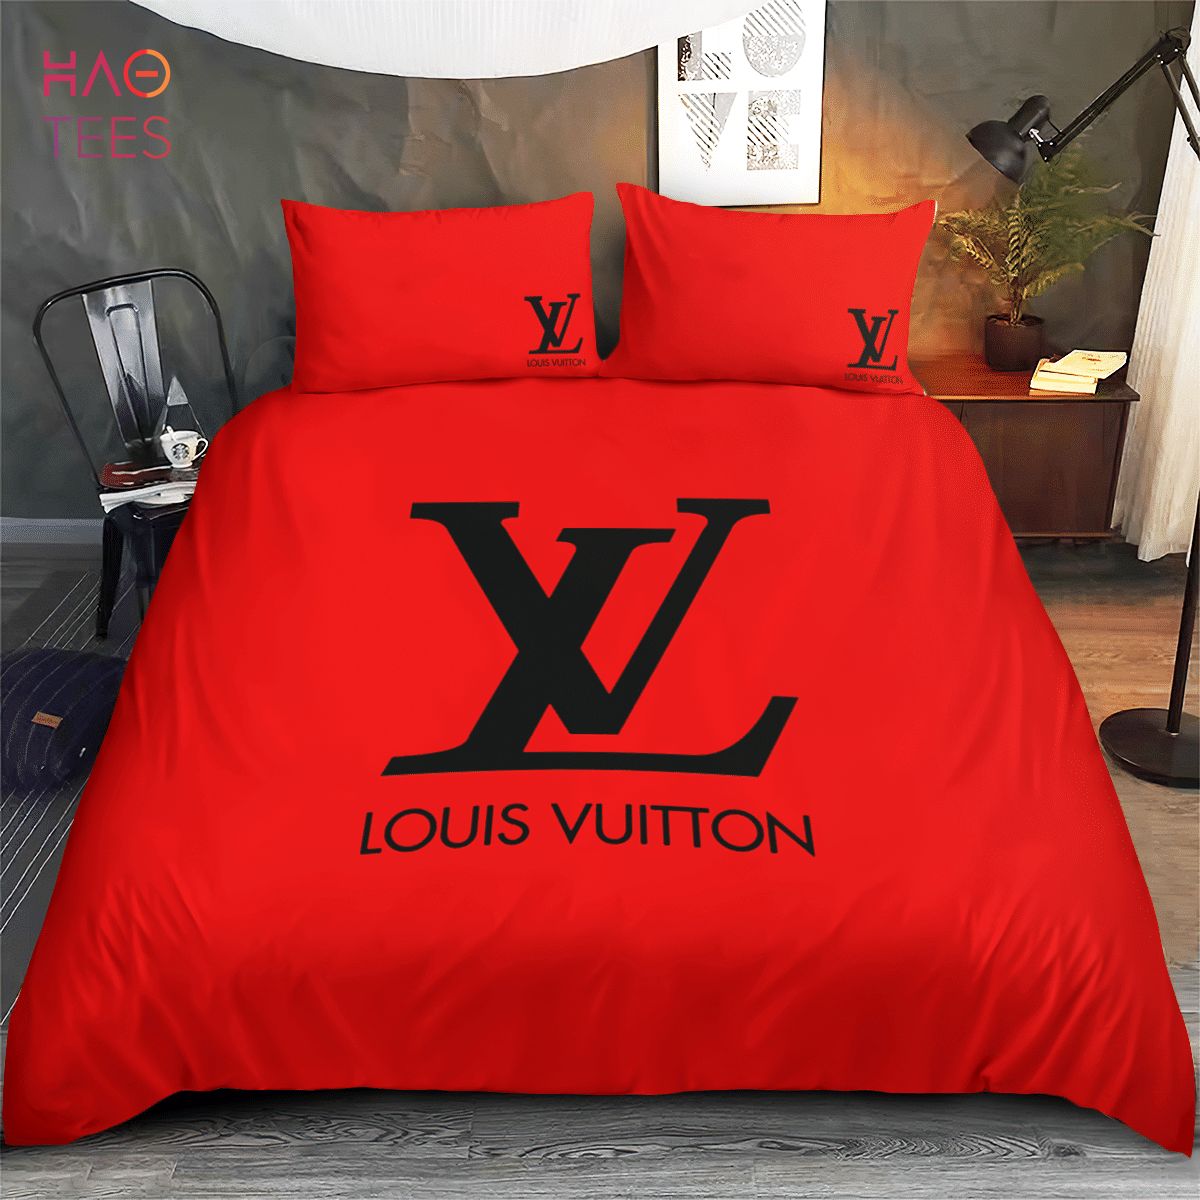 HOT Louis Vuitton Red Luxury Brand Bedding Sets Limited Edition